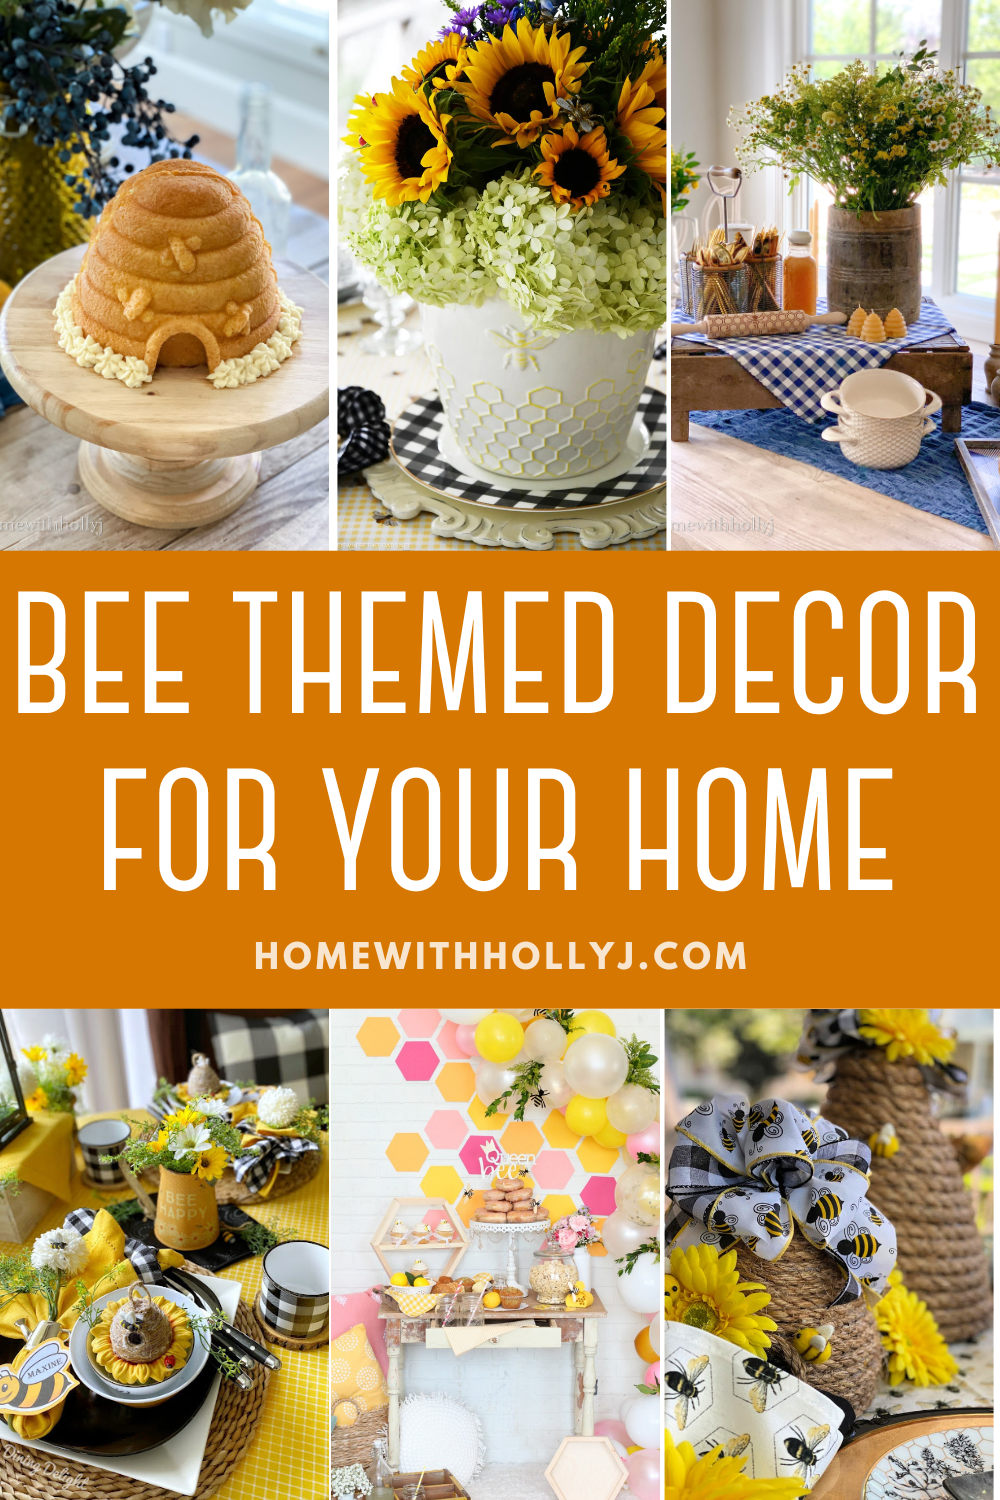 Bring the beauty of bees indoors with bee-themed decor! Find inspiration to infuse your space with nature's grace and sophistication.